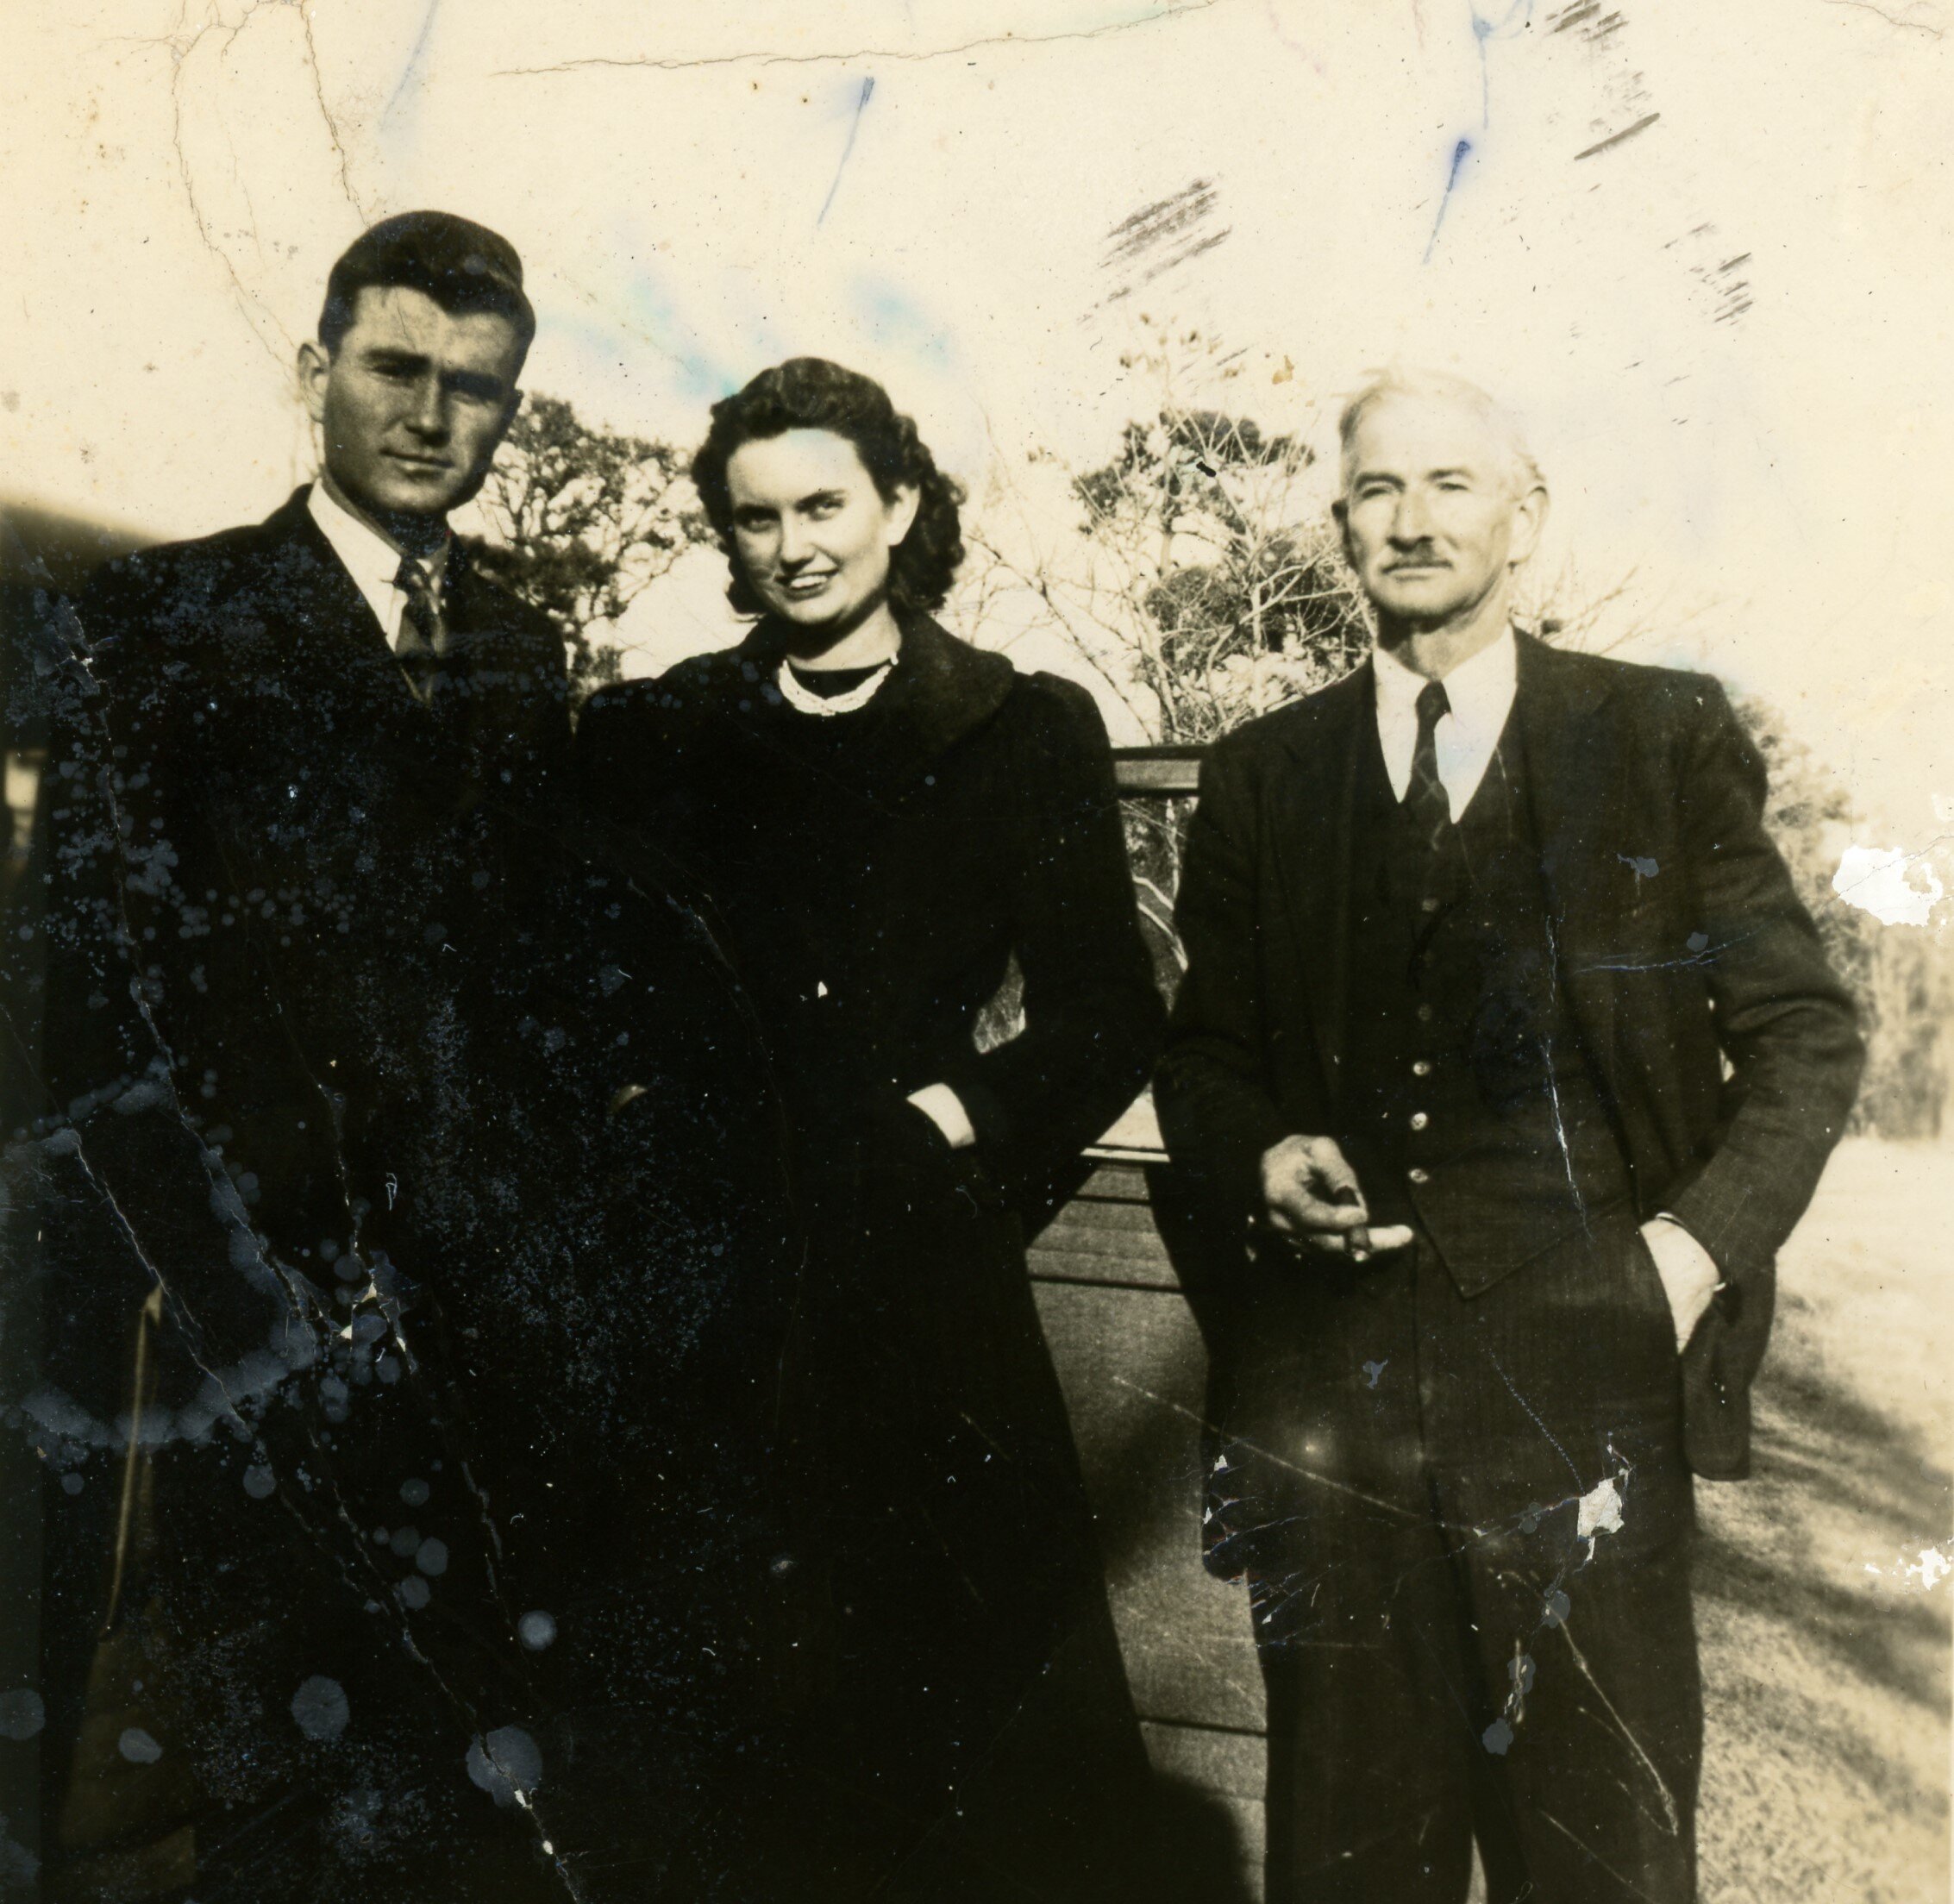 Norman, Anne, and Mr. Guy Chadwick, November 1937